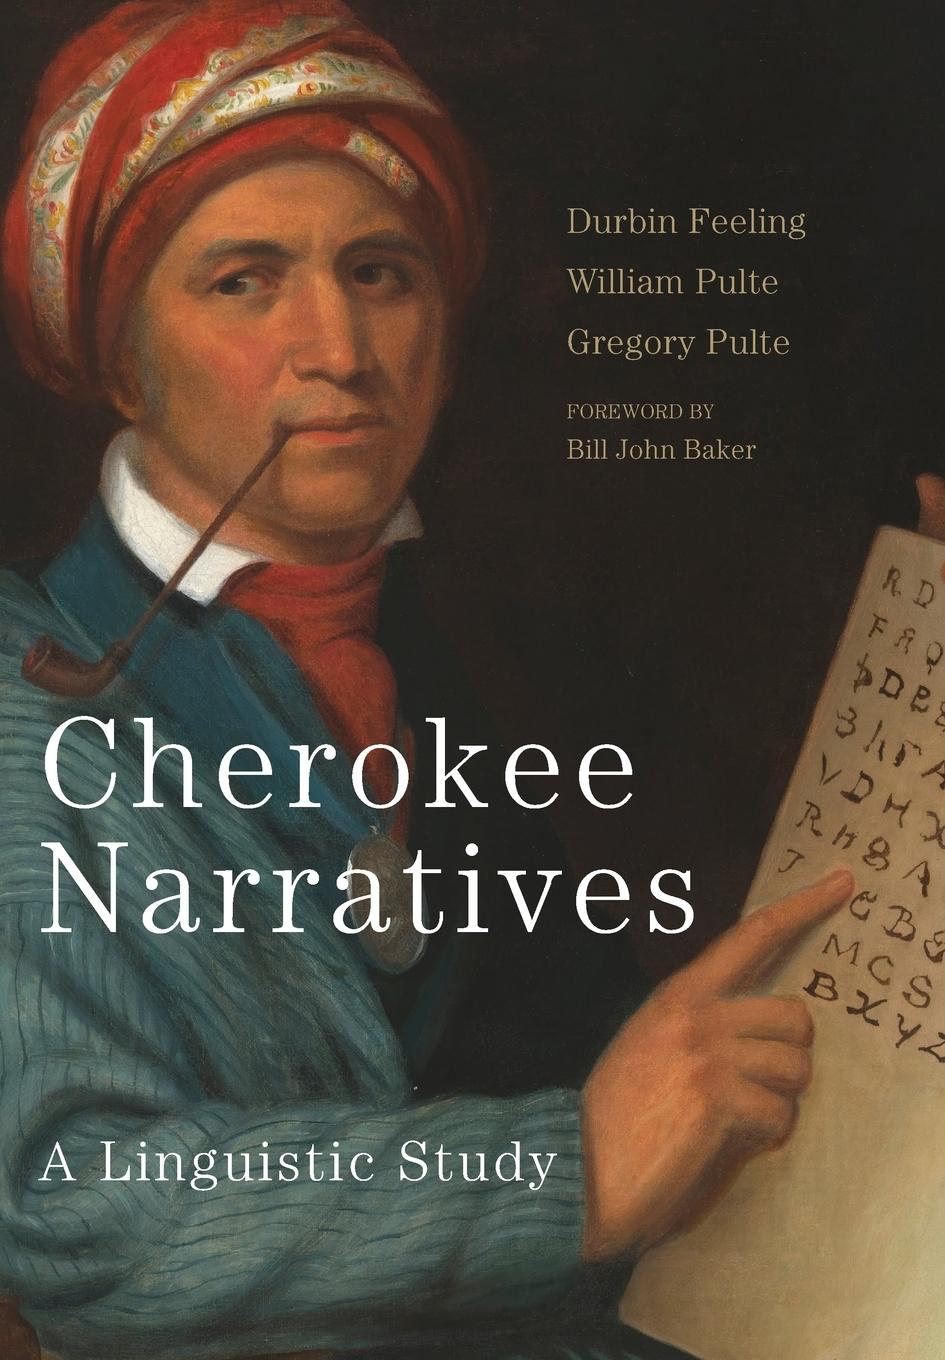 Cherokee Narratives - Feeling, Durbiin Pulte, William Pulte, Gregory